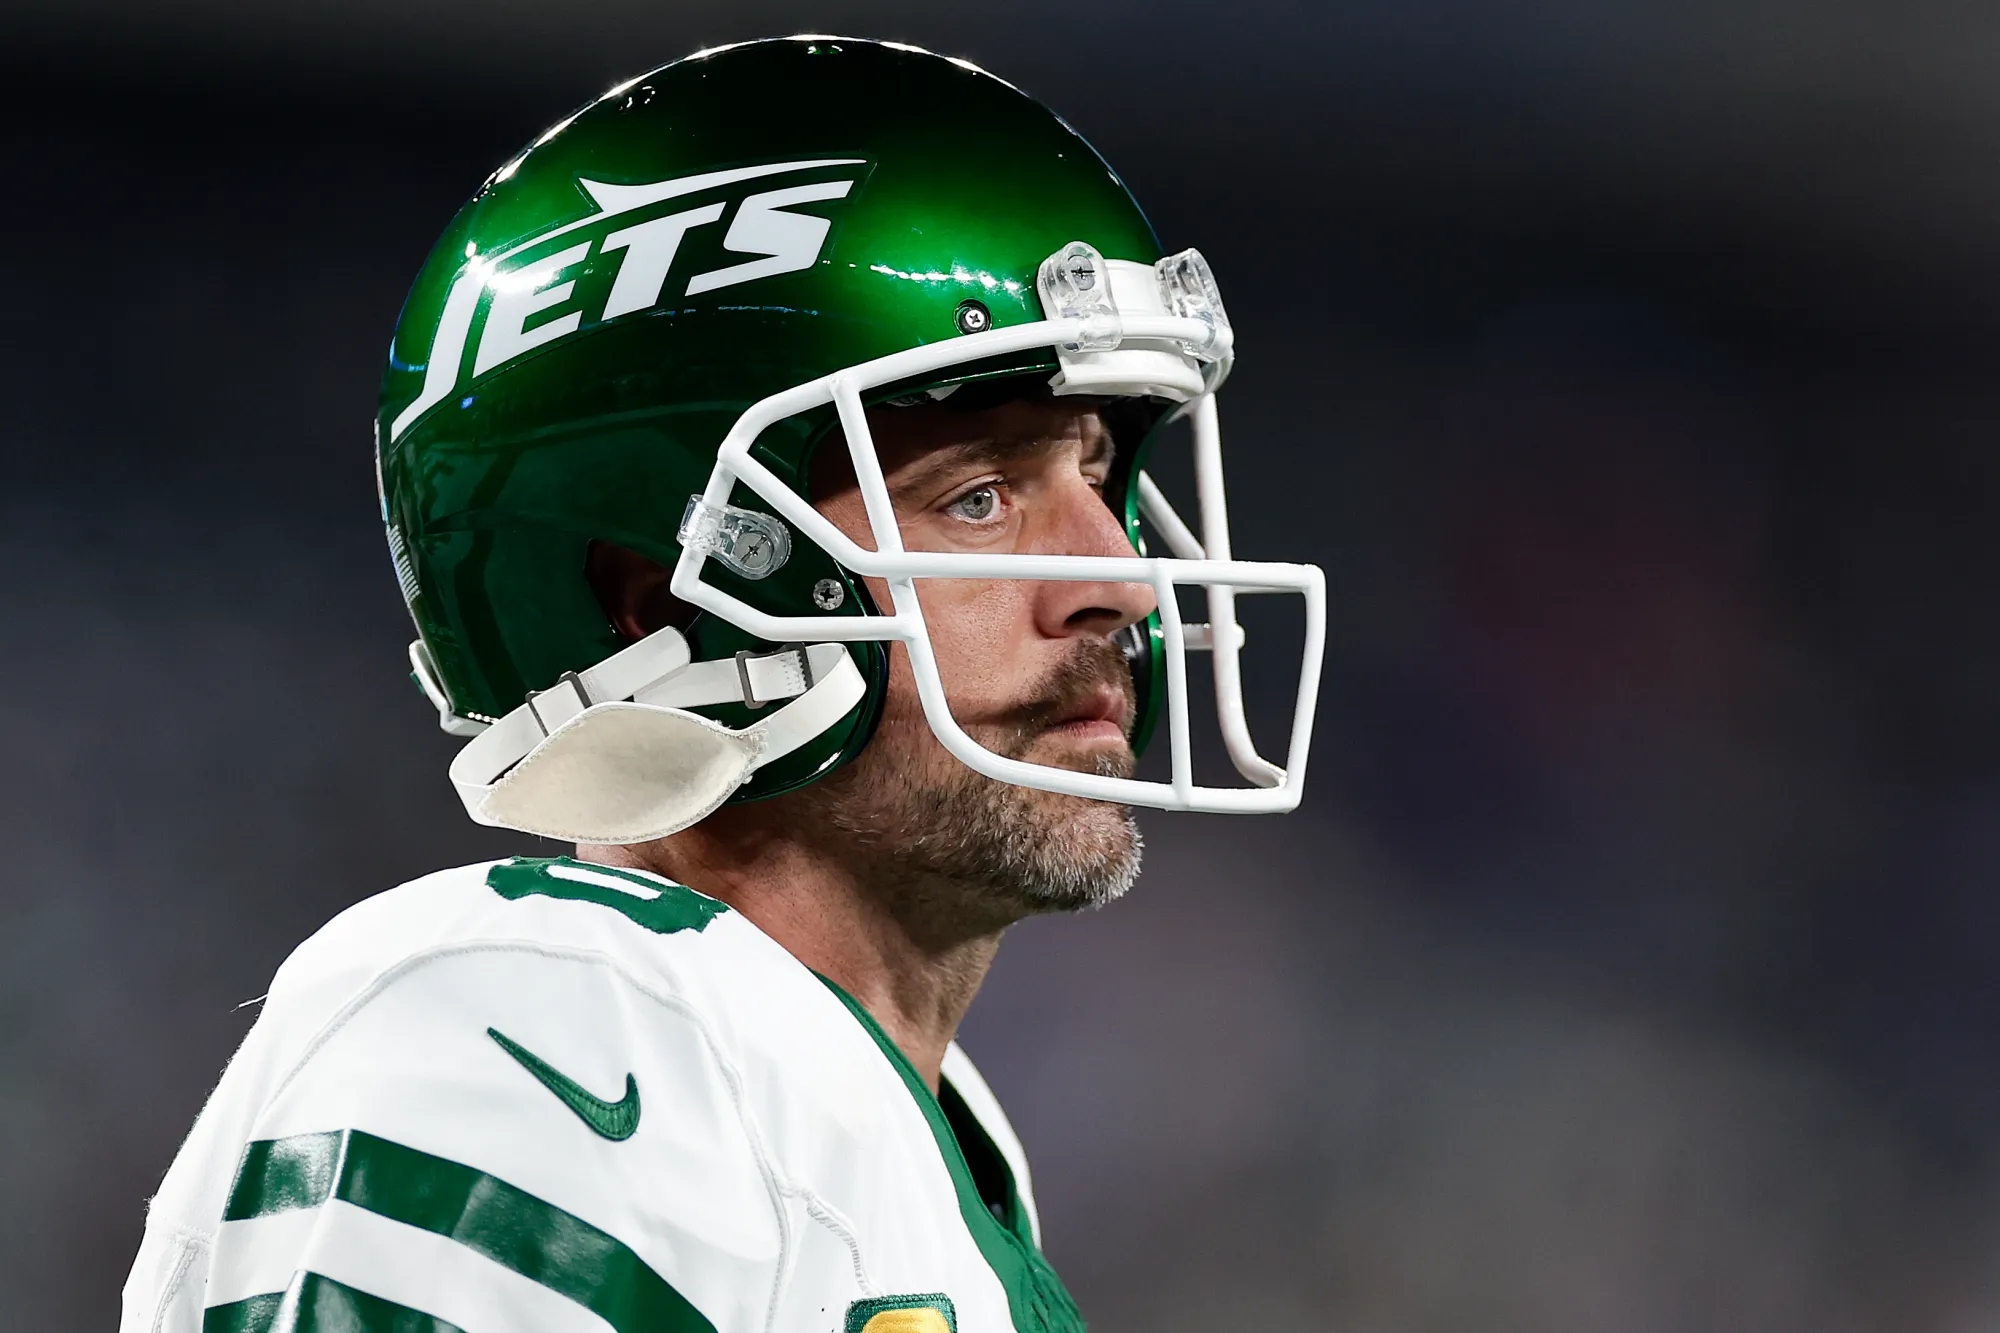  From Gridiron to Government? Aaron Rodgers' Surprising Political Pass and What It Means for the Jets